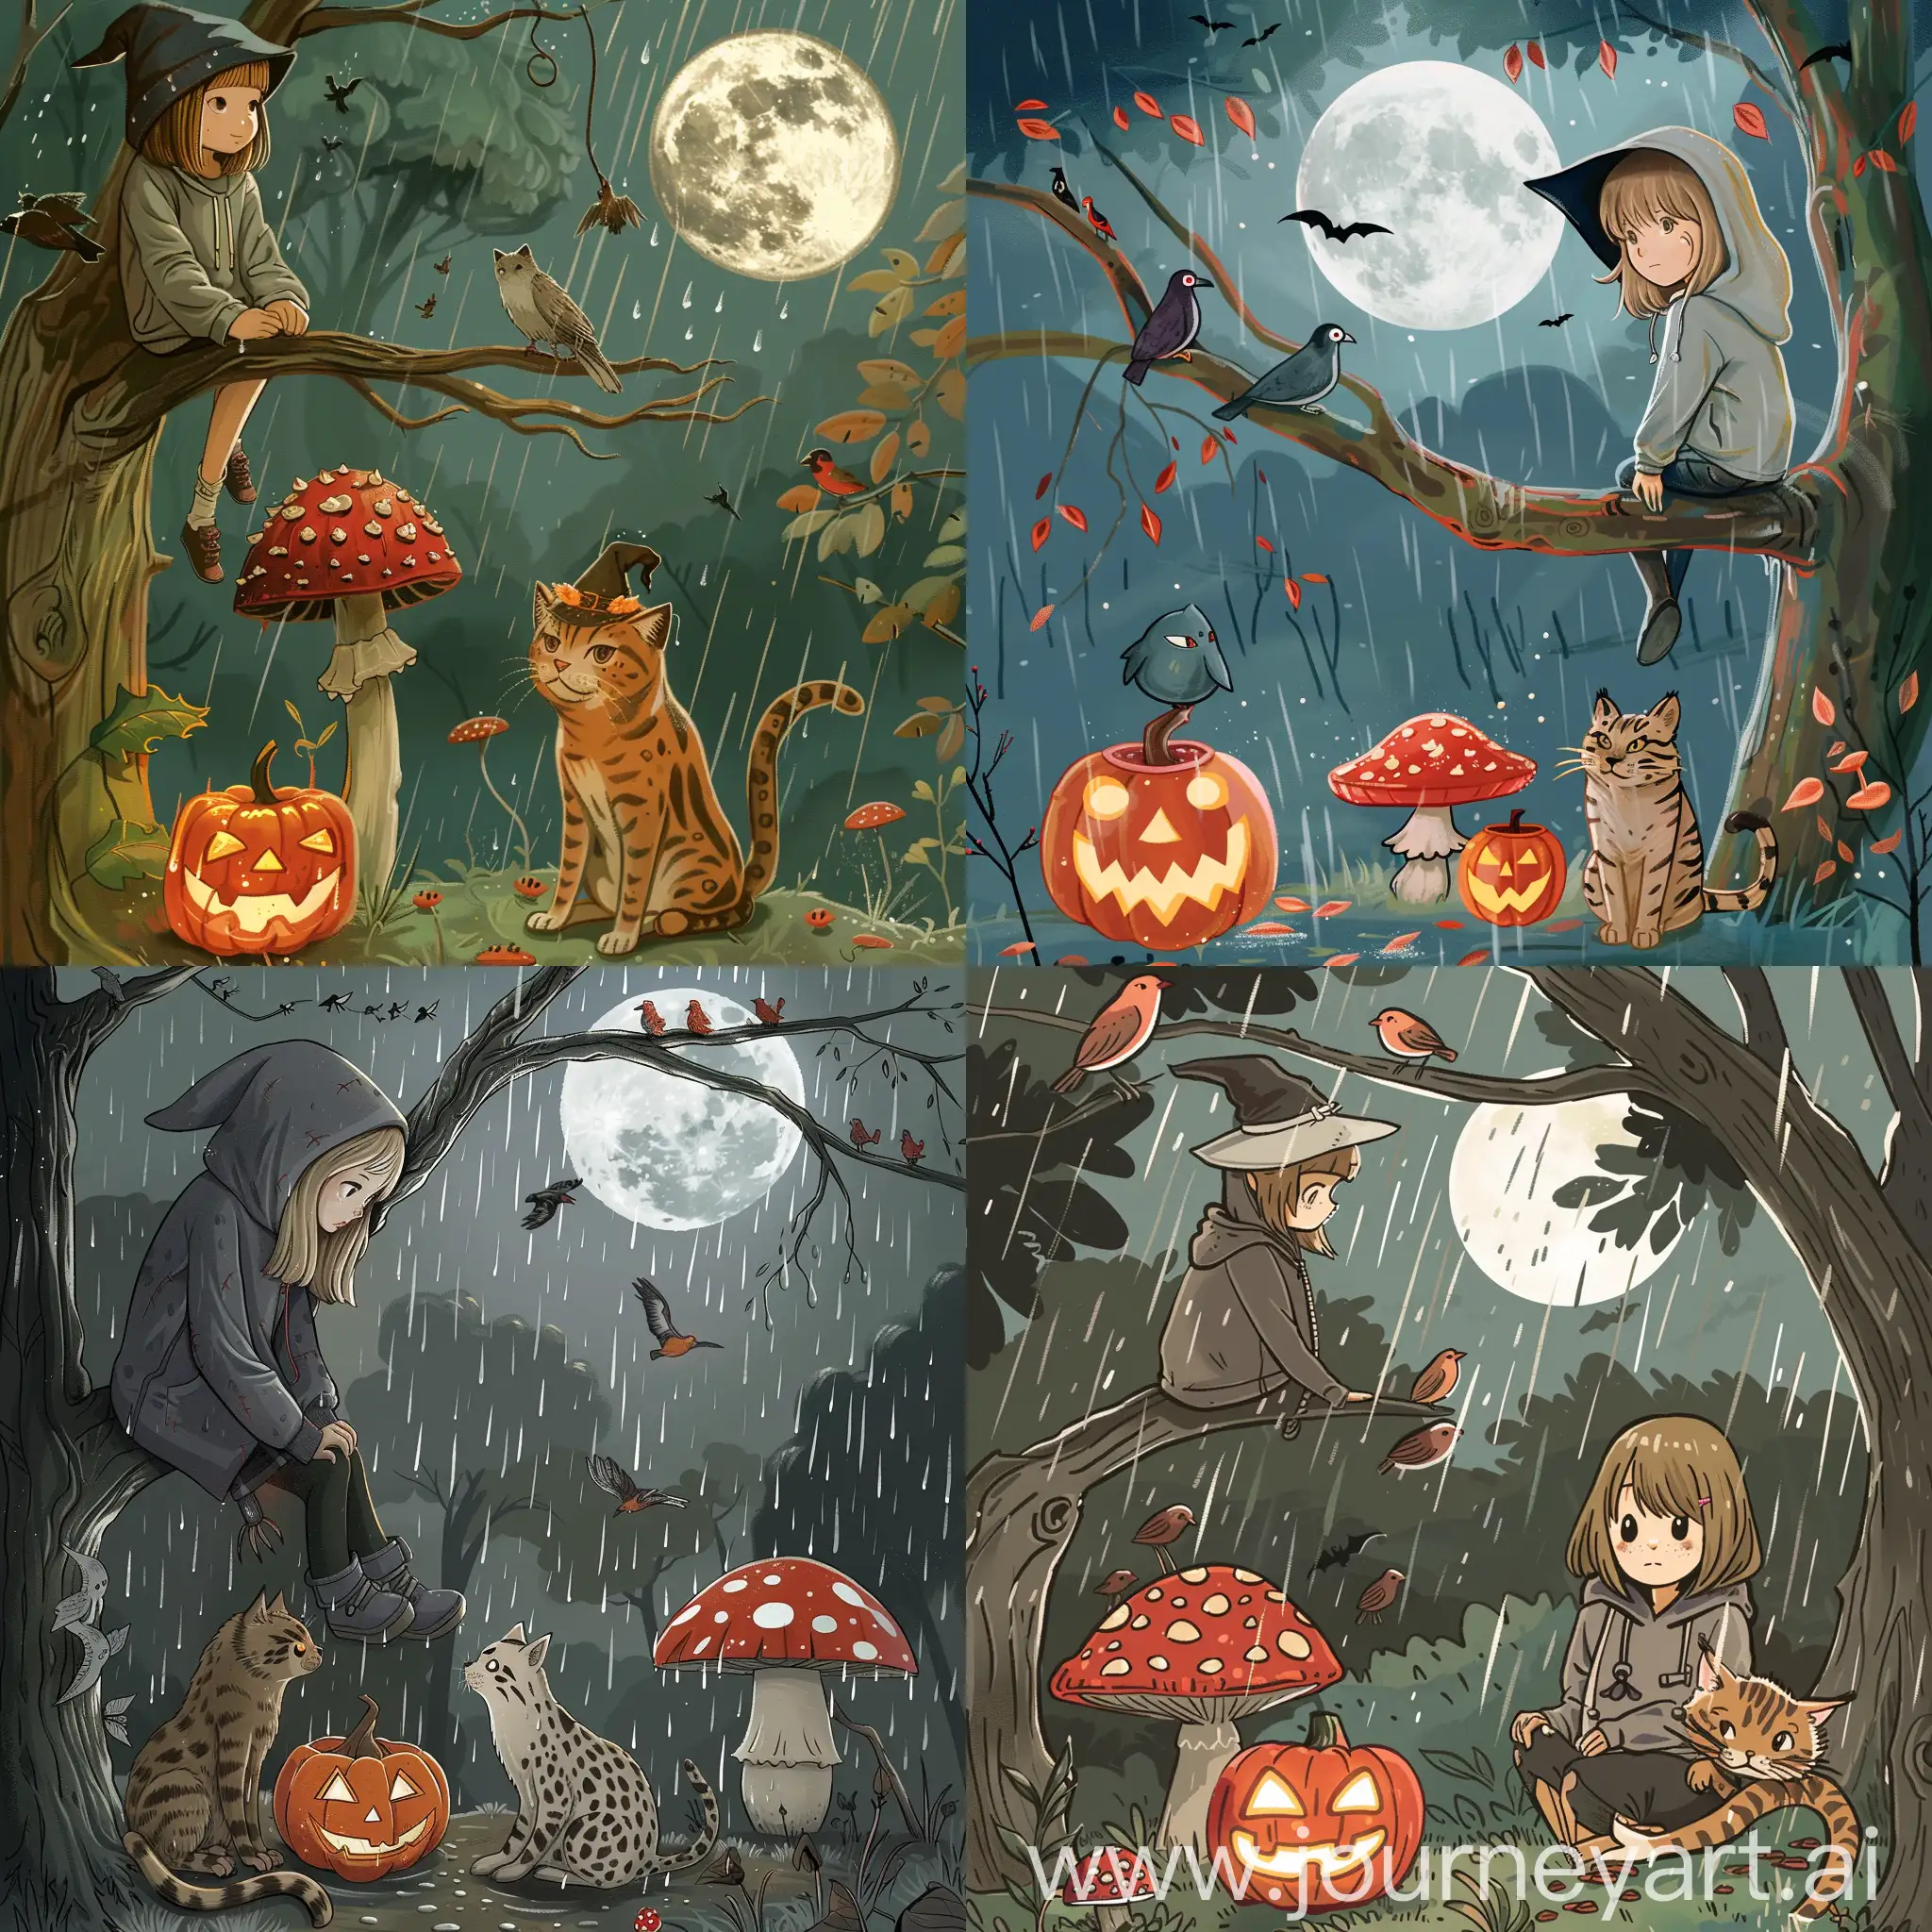 Studio Ghibli style moonlit woodland scene, it is raining and there is a full moon, there are some birds overhead, a young girl with shoulder length light brown hair wearing hoodie and witches hat sat high on a branch in a tree, there is a wildcat sitting next to her, on the ground is a jack o lantern and a cartoon mushroom which is red with white spots,